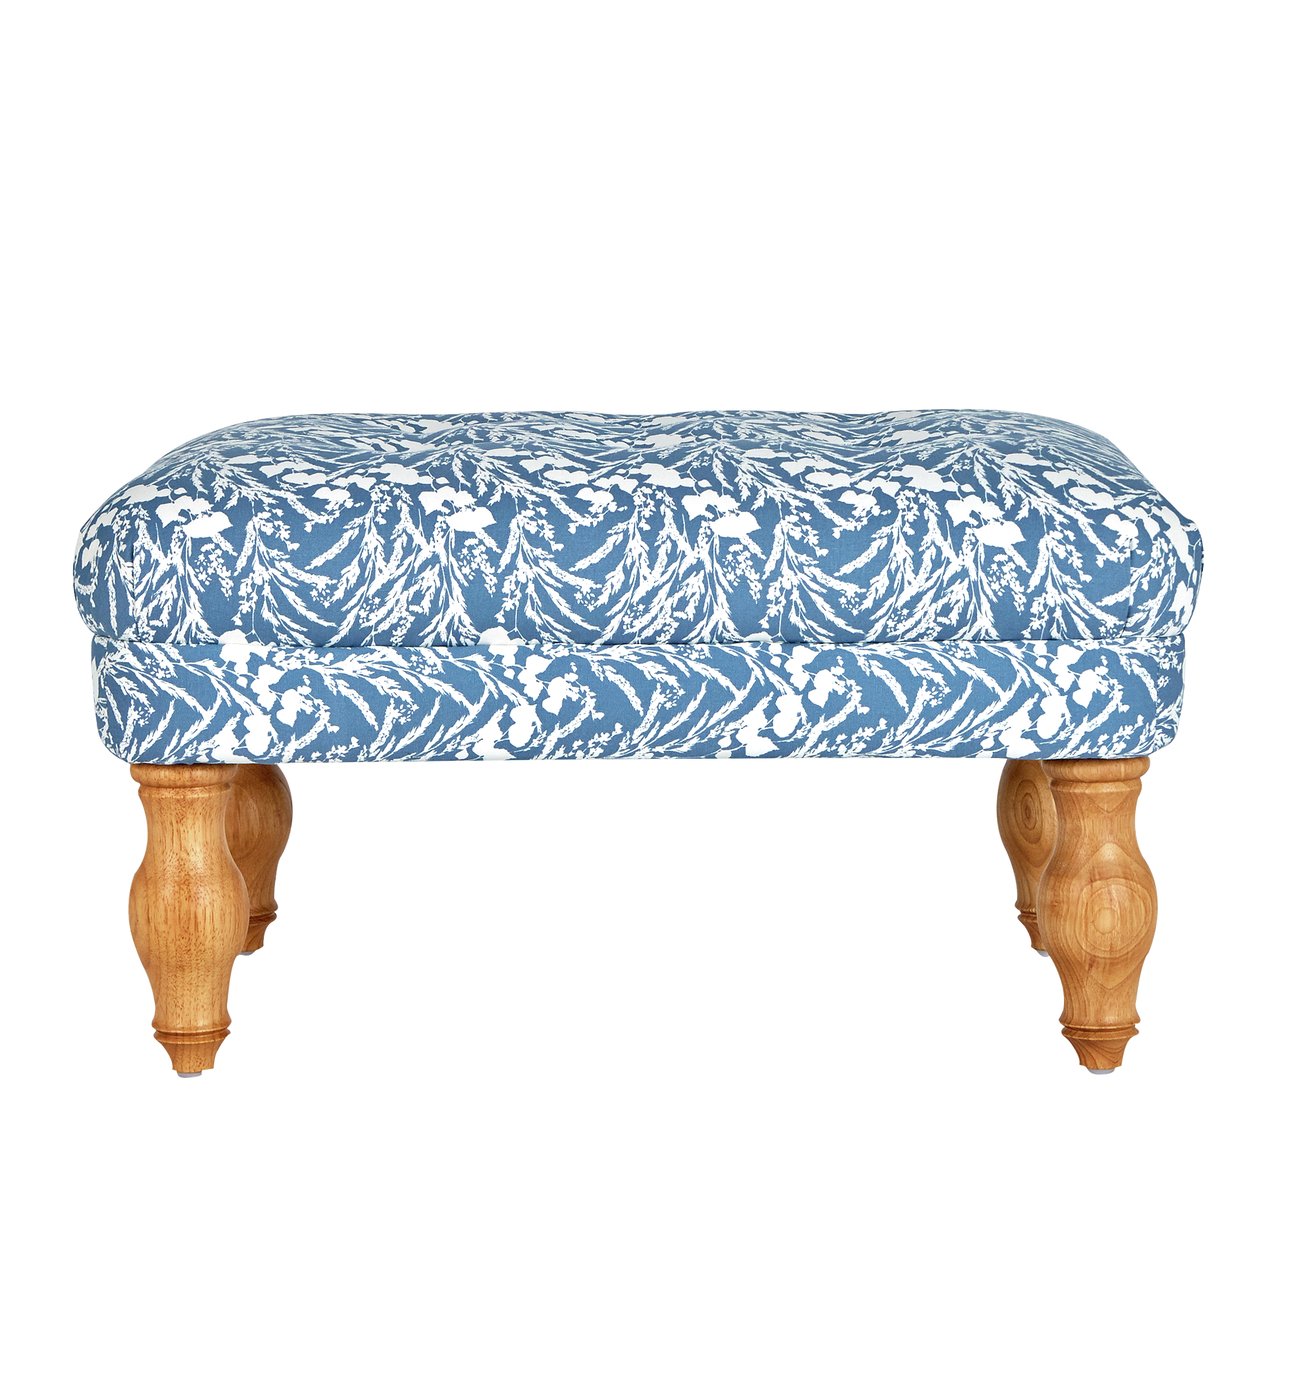 Argos Home Macy Fabric Footstool - Blue Floral